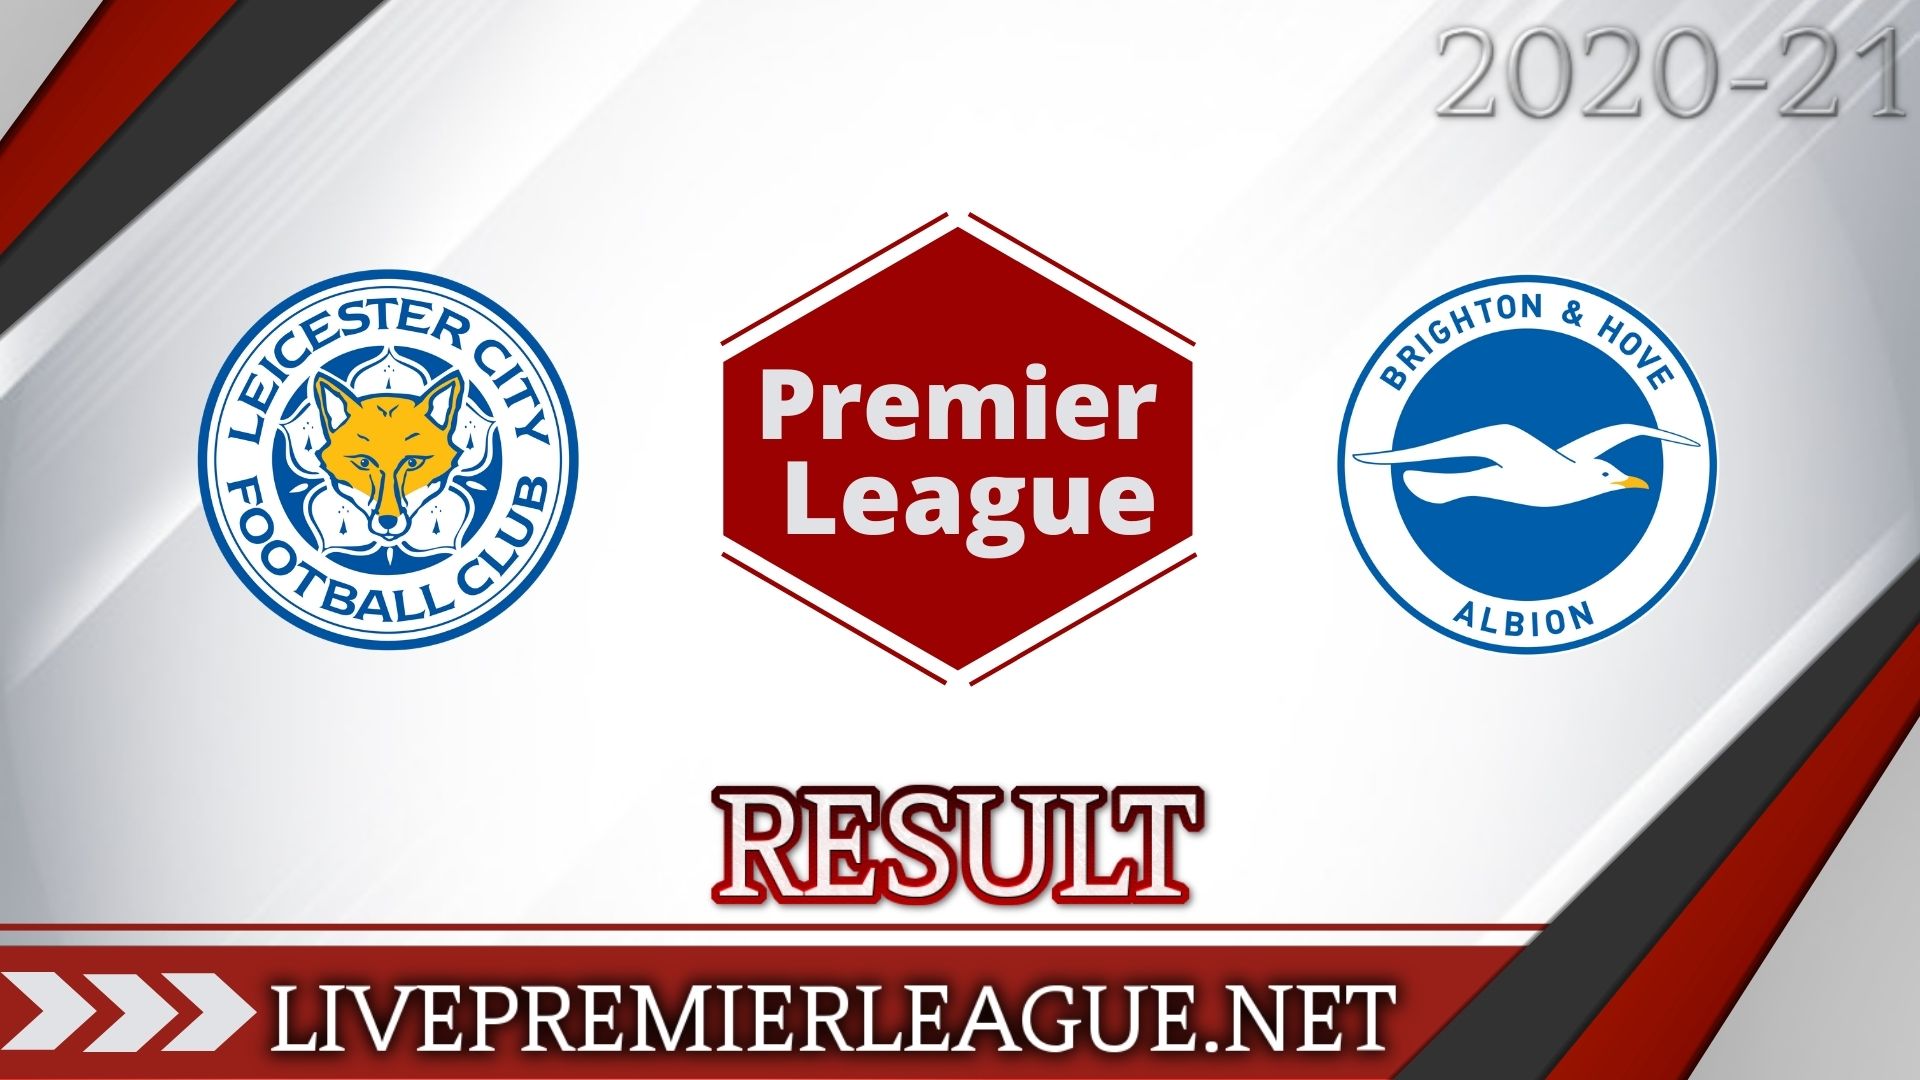 Leicester City Vs Brighton and Hove Albion | Week 12 Result 2020